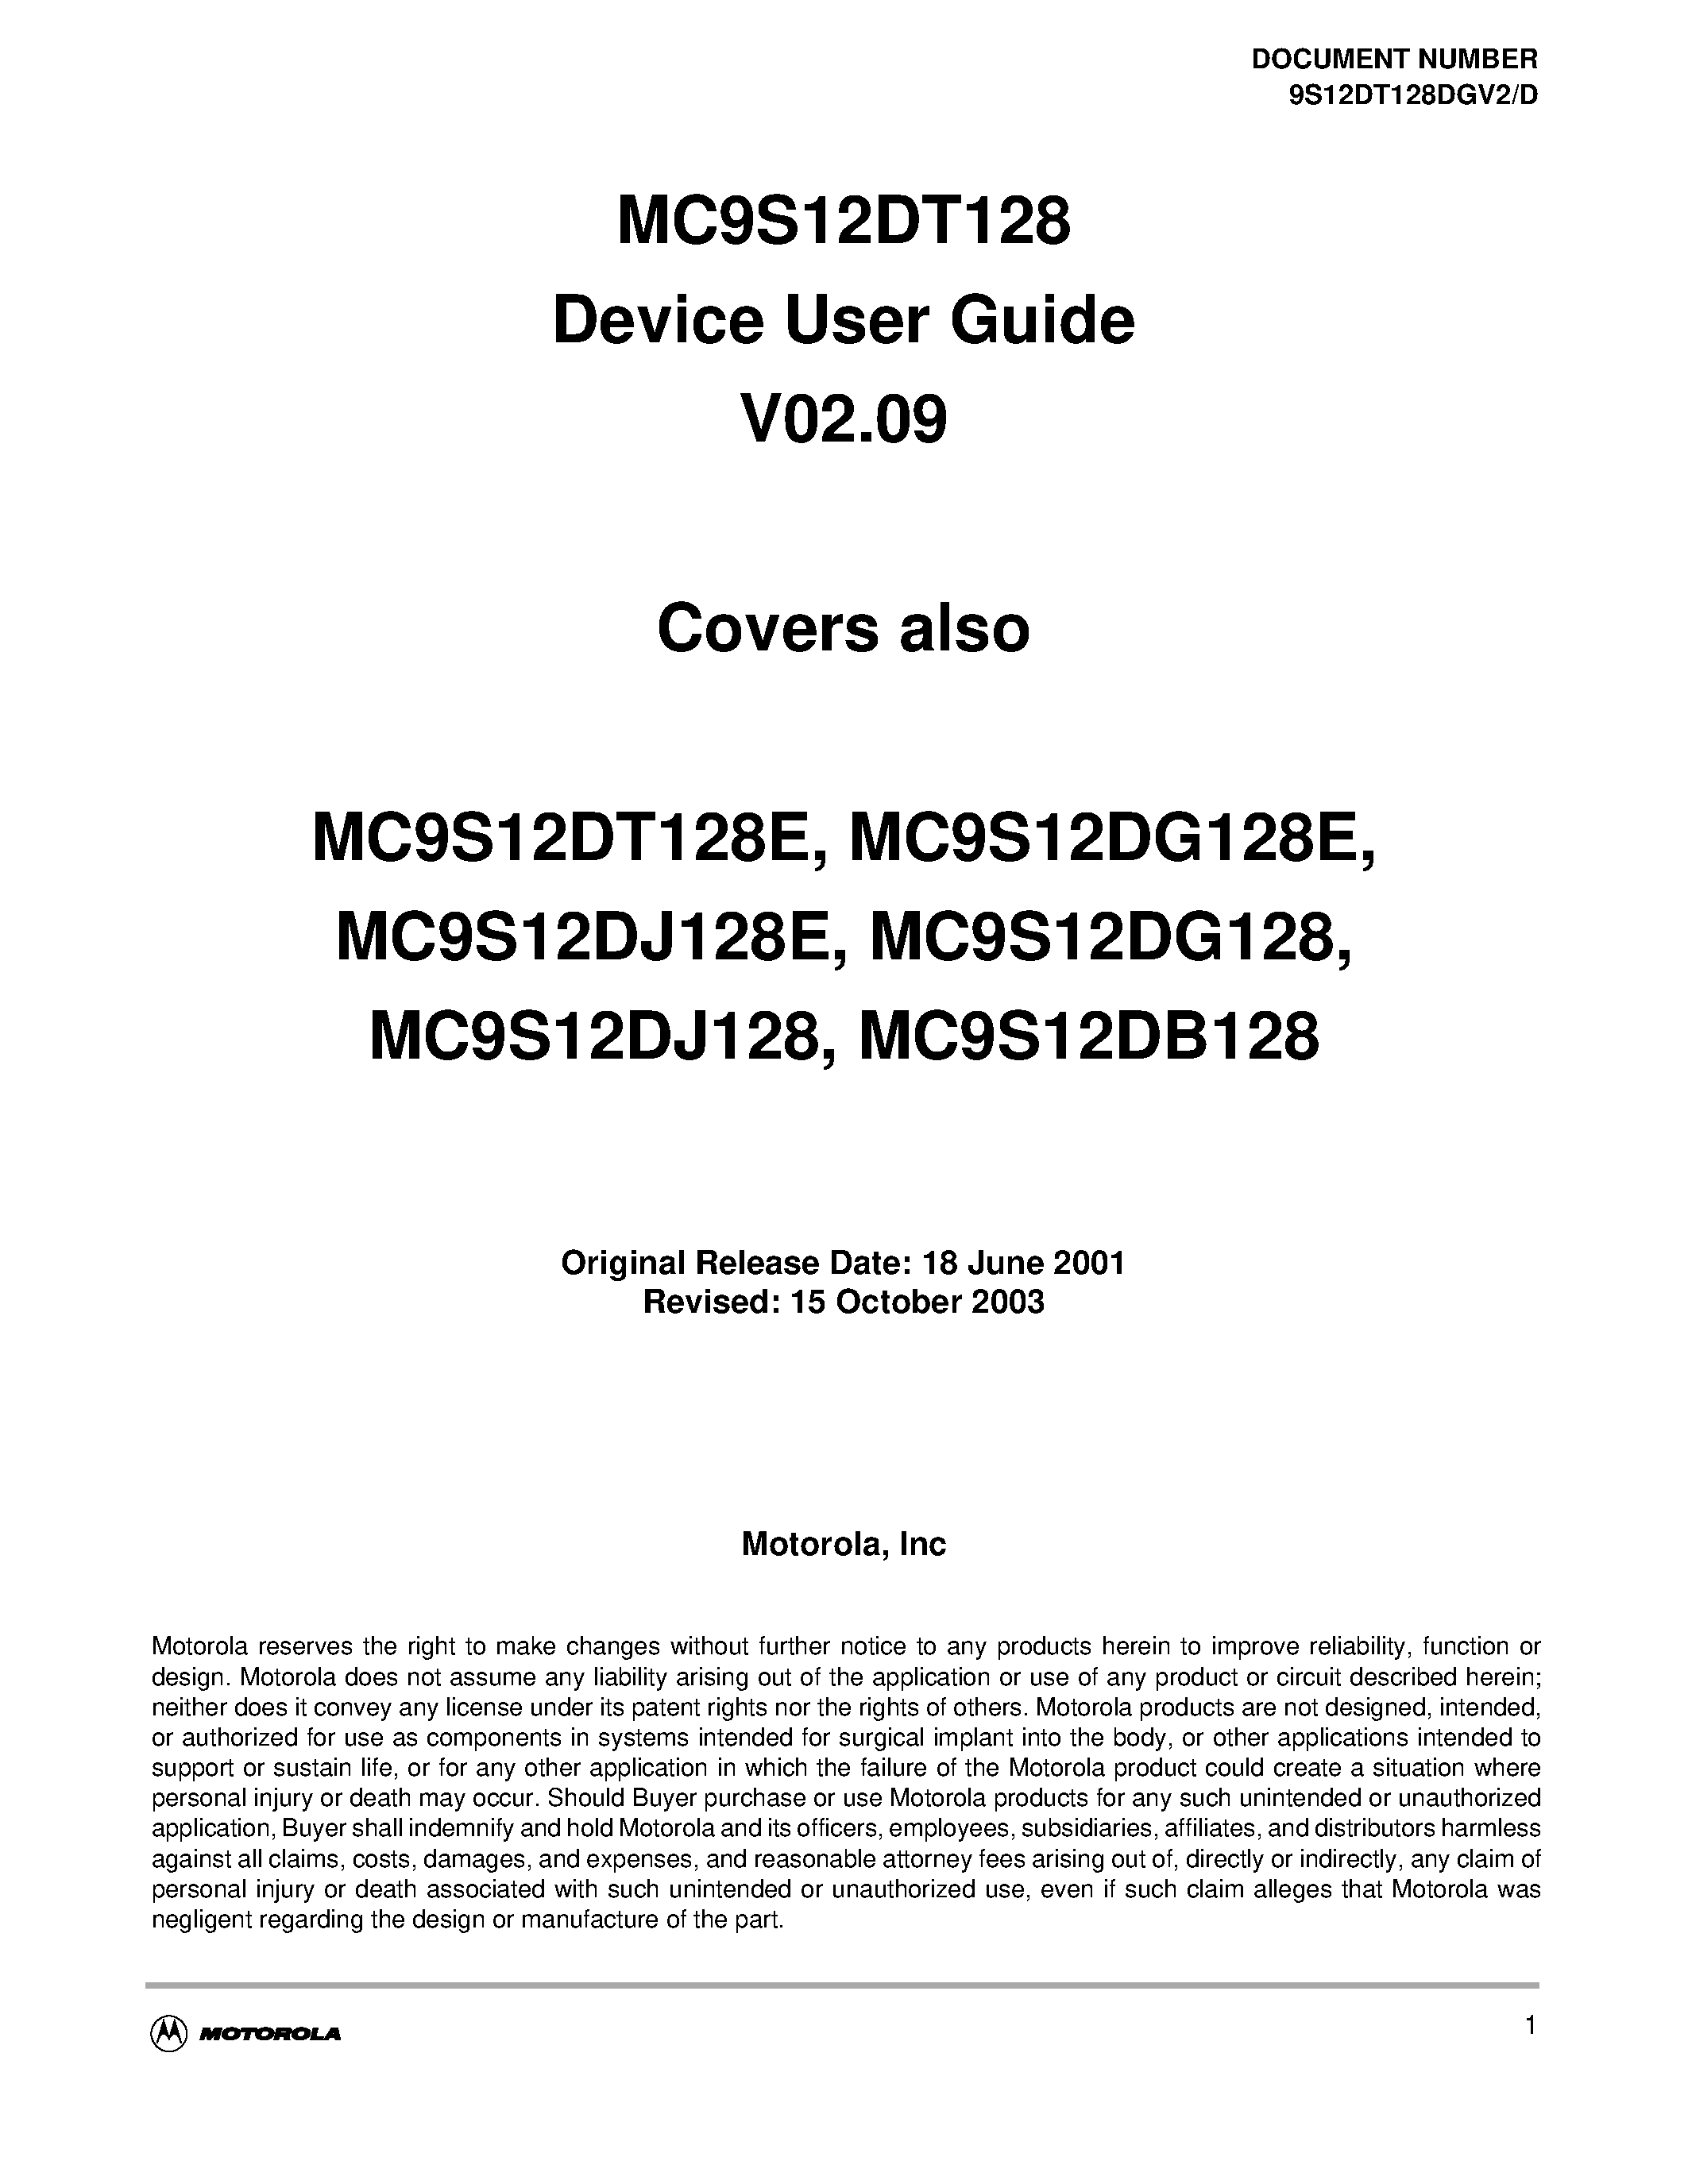 Datasheet S12SCIV2D - MC9S12DT128 Device User Guide V02.09 page 1